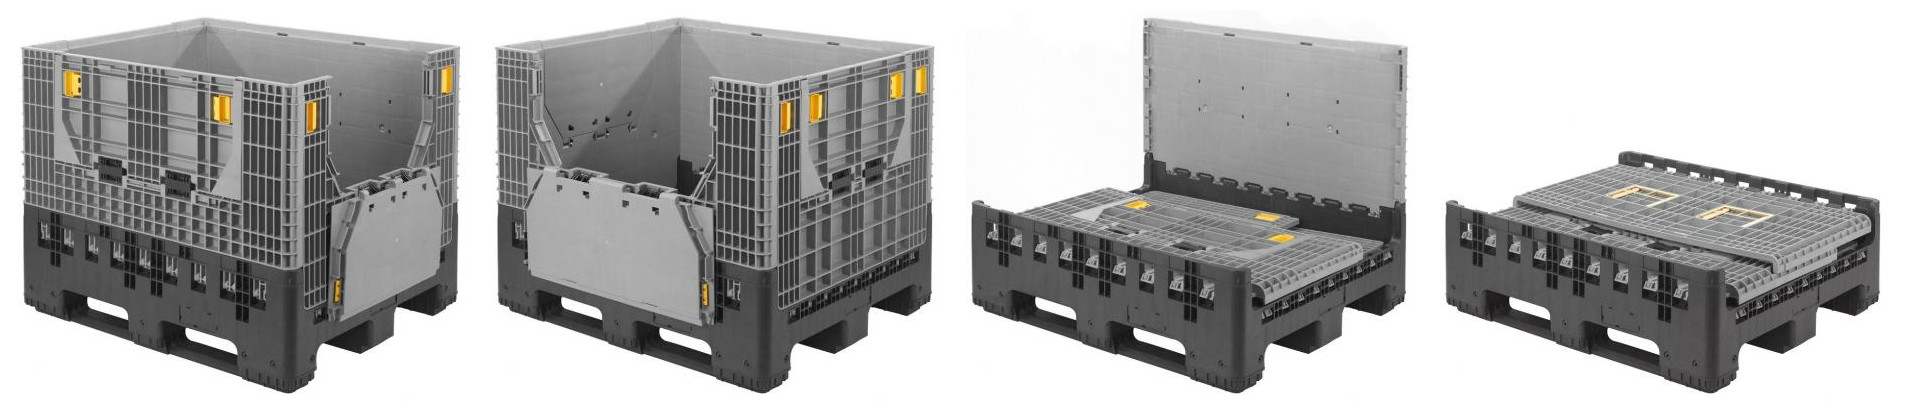 Collapsible Bulk Containers with Drop Doors for Auto Industry 